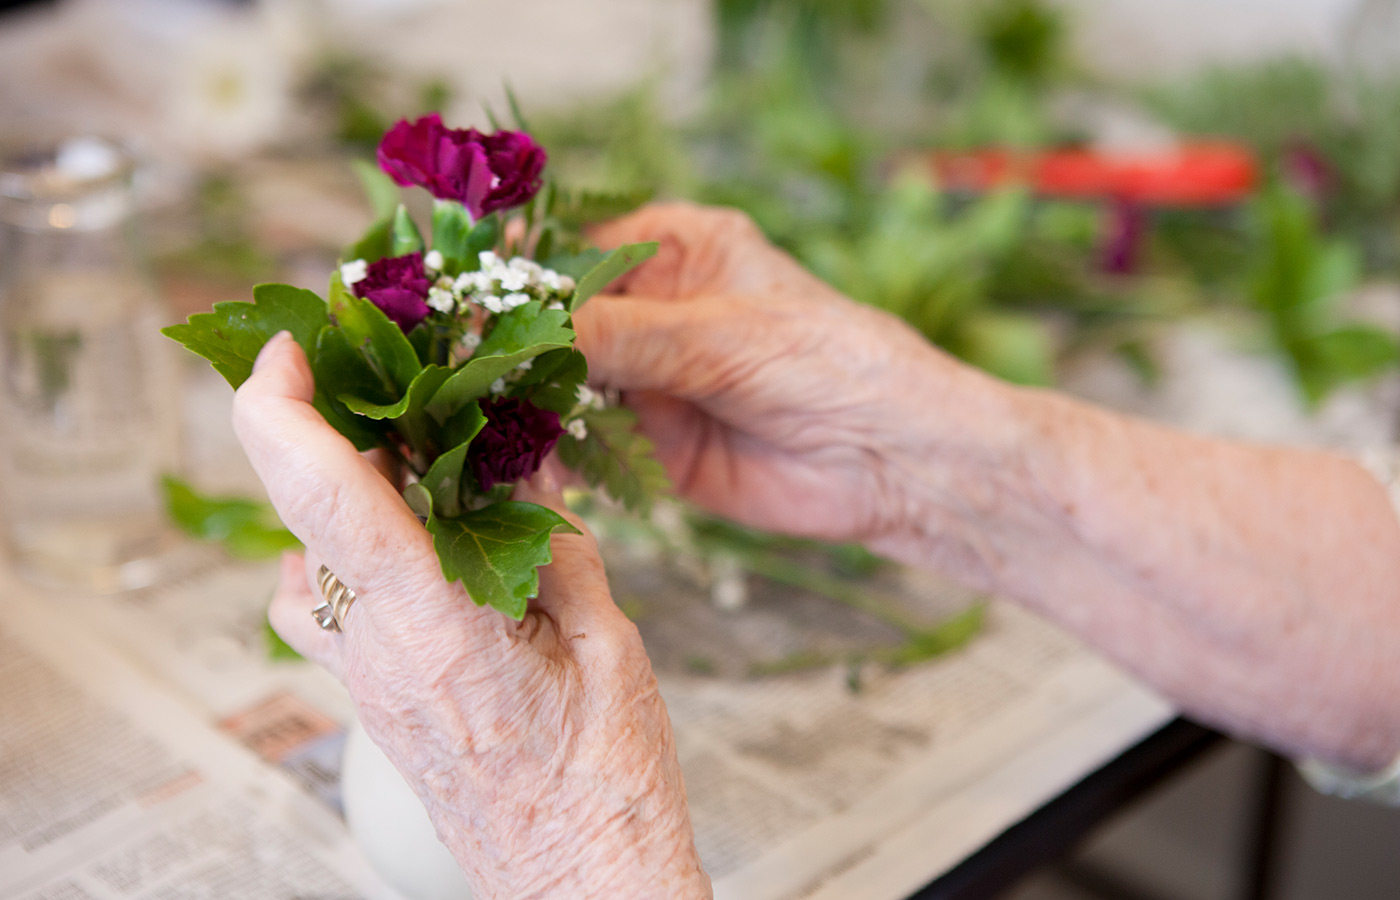 A resident is arranging flowers.